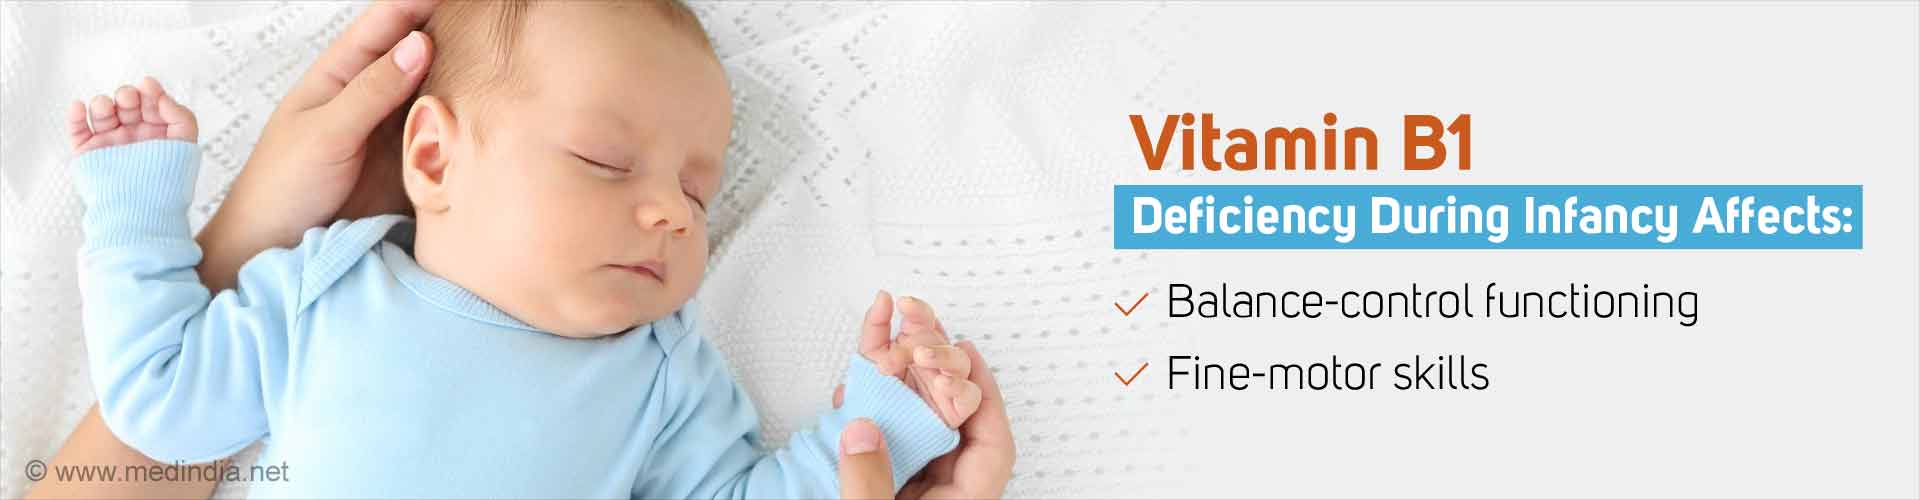 Vitamin B1 Deficiency During Infancy Affects:
- Balance-control functioning
- Fine-motor skills